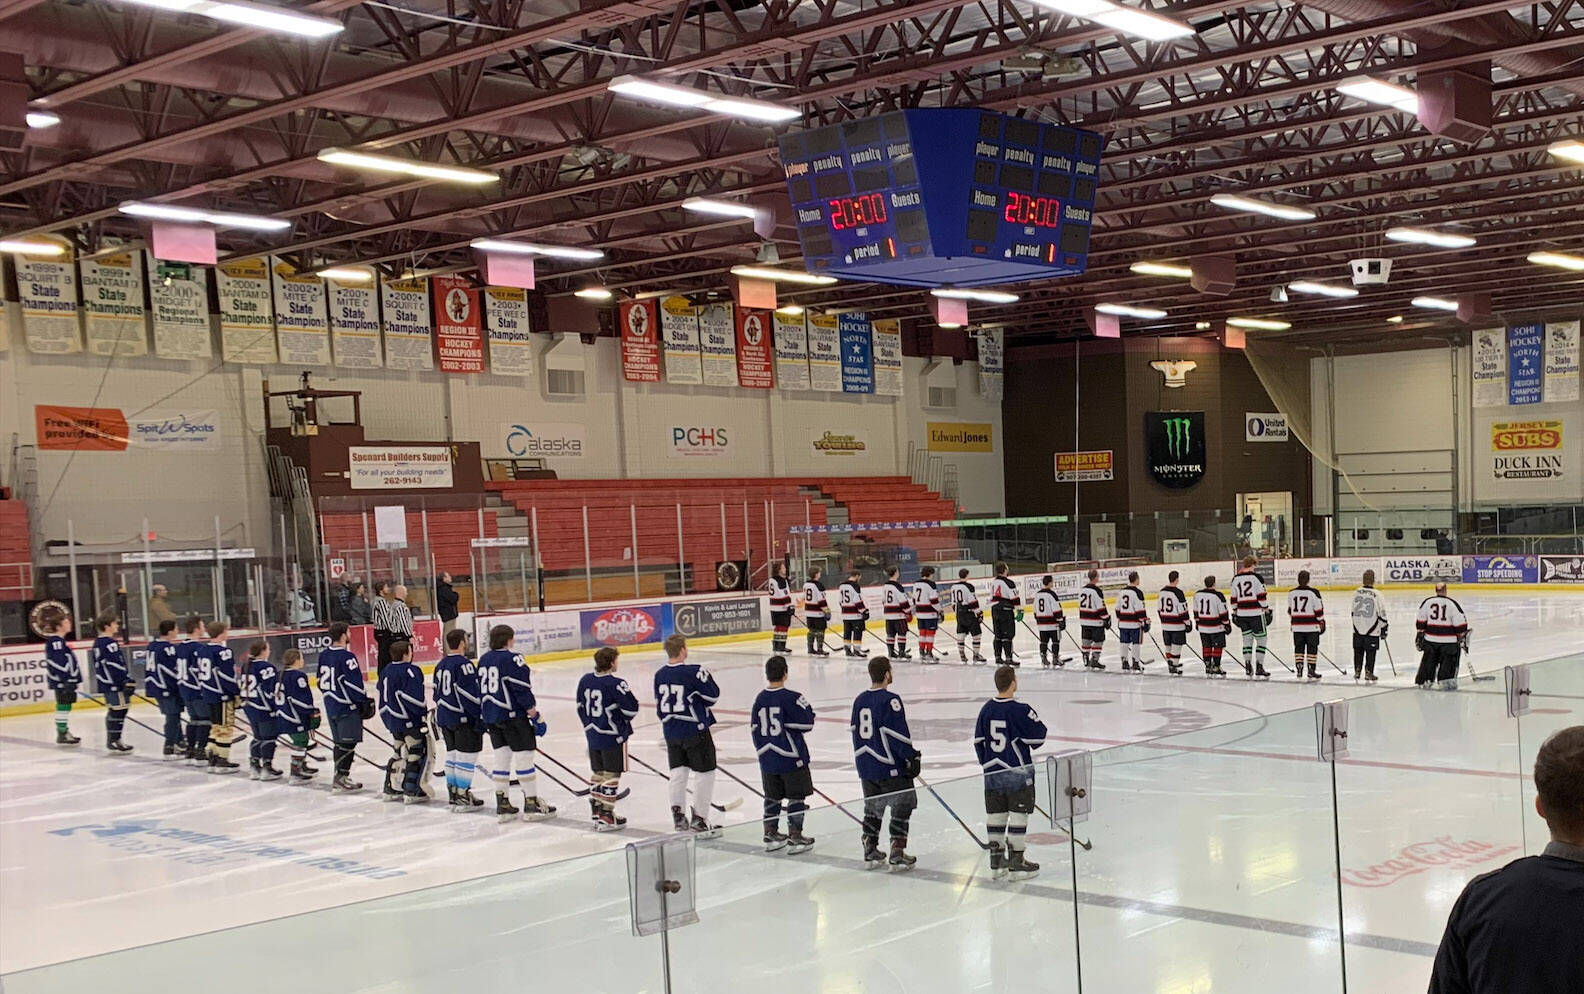 Hockey players in the annual Kenai/Niksiki and SoHi/Skyview alumni hockey game stand for the national anthem at the Soldotna Regional Sports Complex on Friday, Dec. 22, 2023 in Soldotna, Alaska. (Ashlyn O’Hara/Peninsula Clarion)